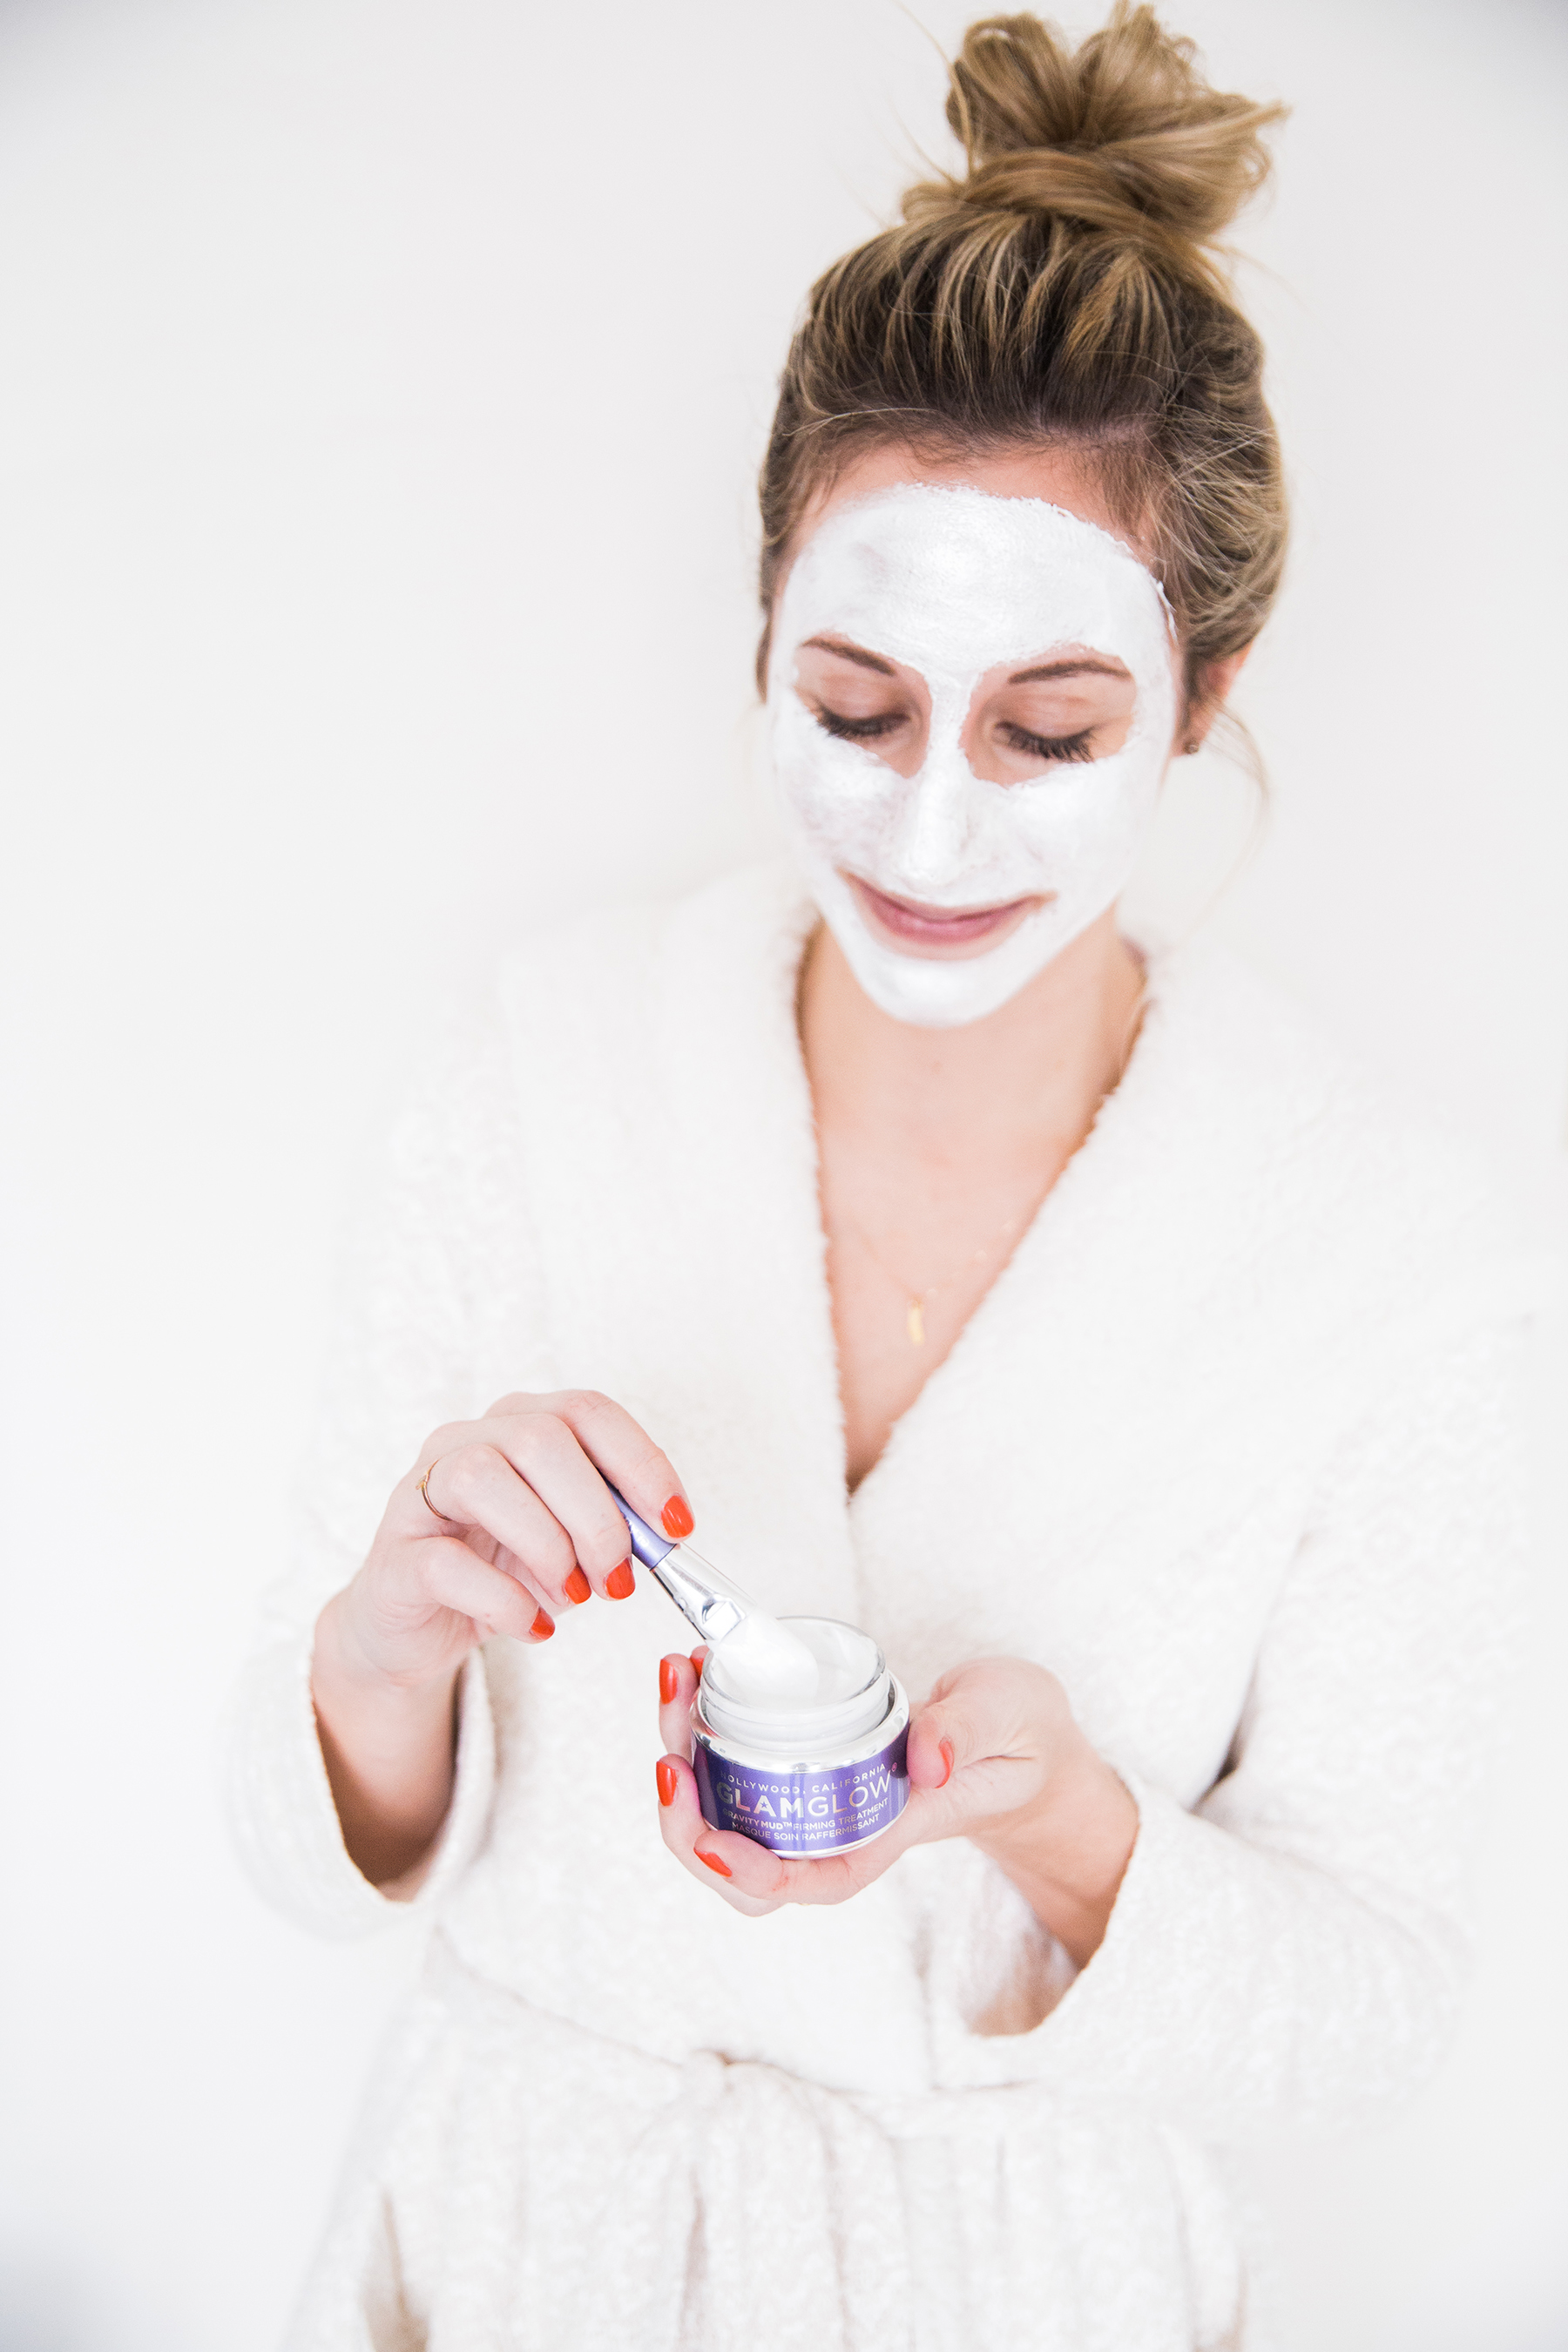 GLAMGLOW face mask, at-home spa, at home spa ideas, pamper yourself, treat yourself, treat yo self, bath salts, bathroom decor, photography by Andrea Posadas for Advicefroma20Something.com